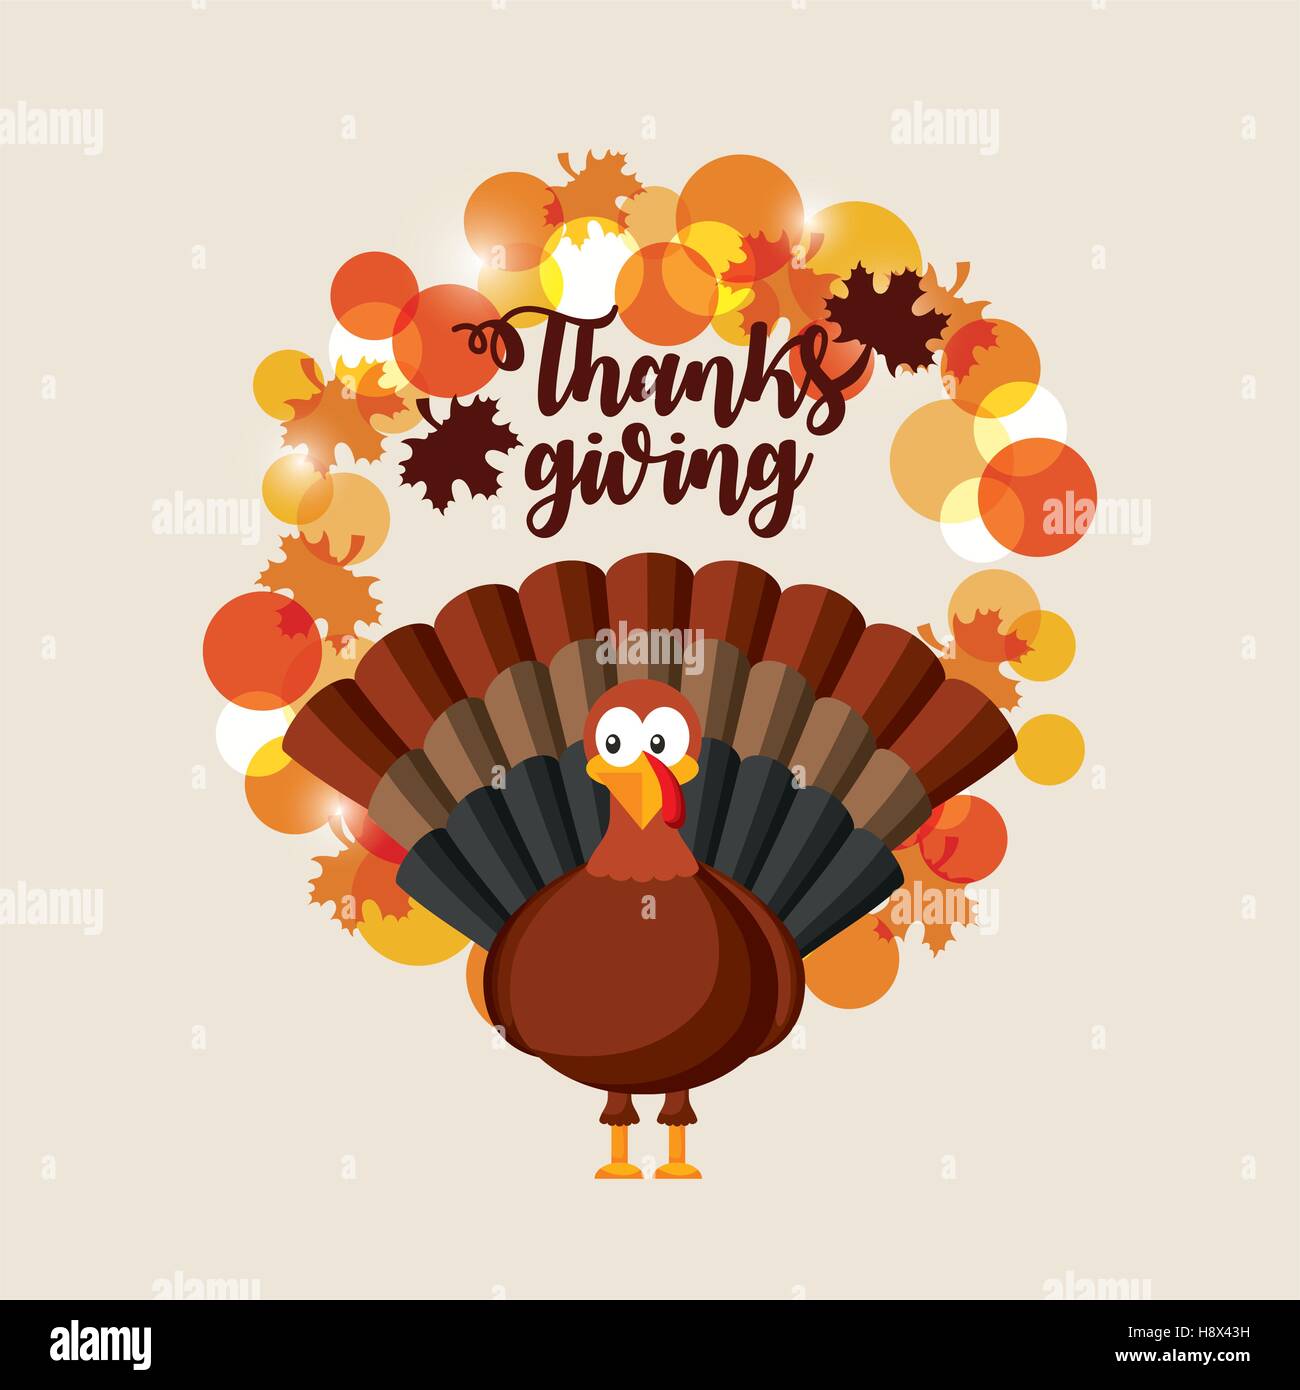 Happy Thanksgiving Card With Cartoon Turkey And Decorative Icons Colorful Design Vector Illustration Stock Vector Image Art Alamy